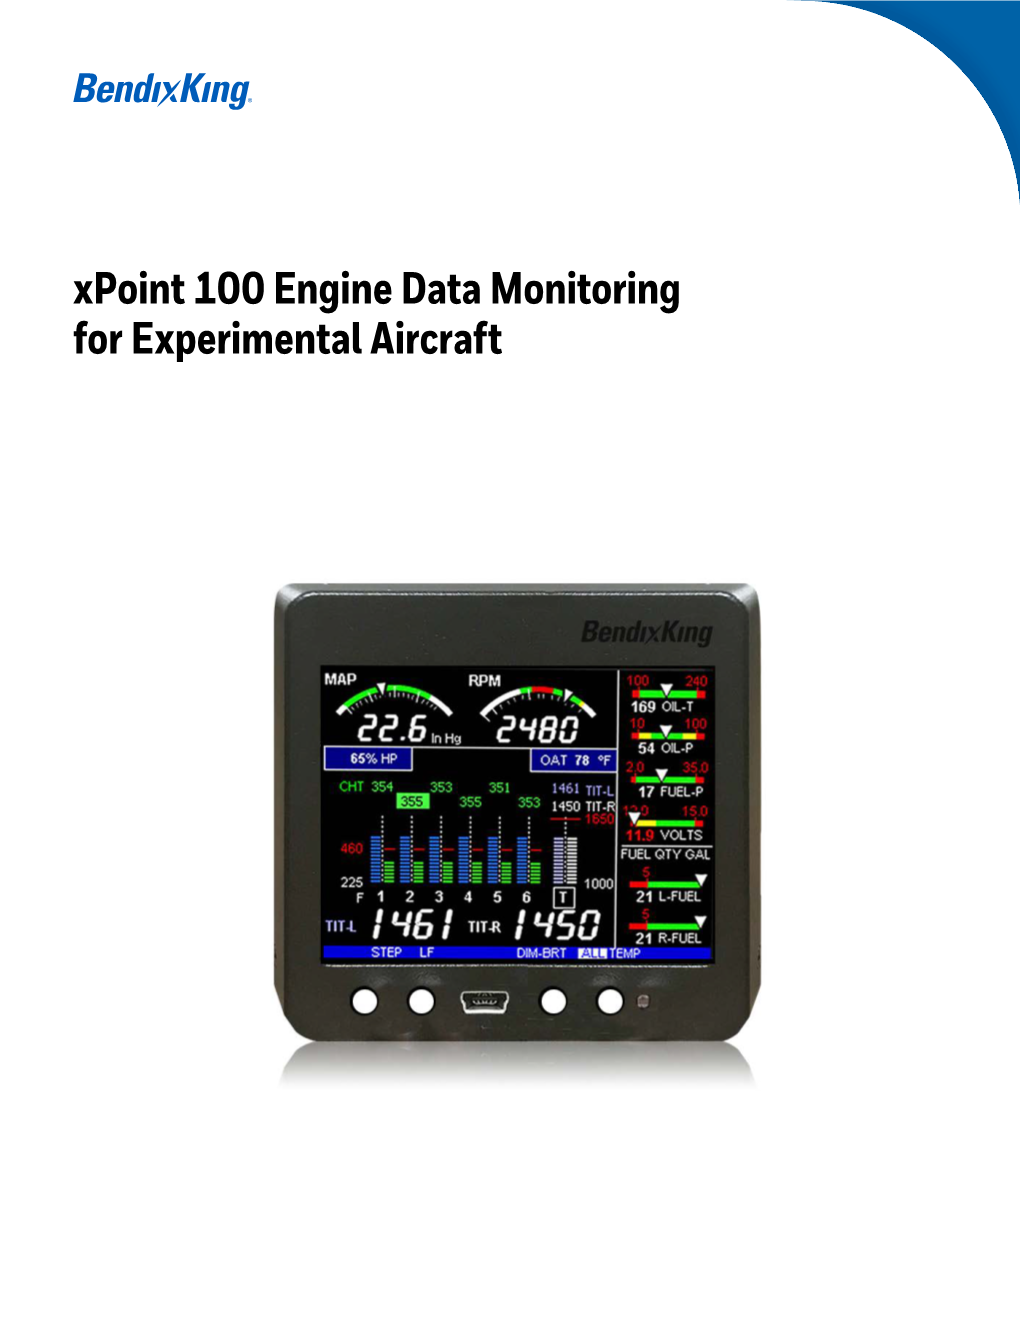 Xpoint 100 Engine Data Monitoring for Experimental Aircraft